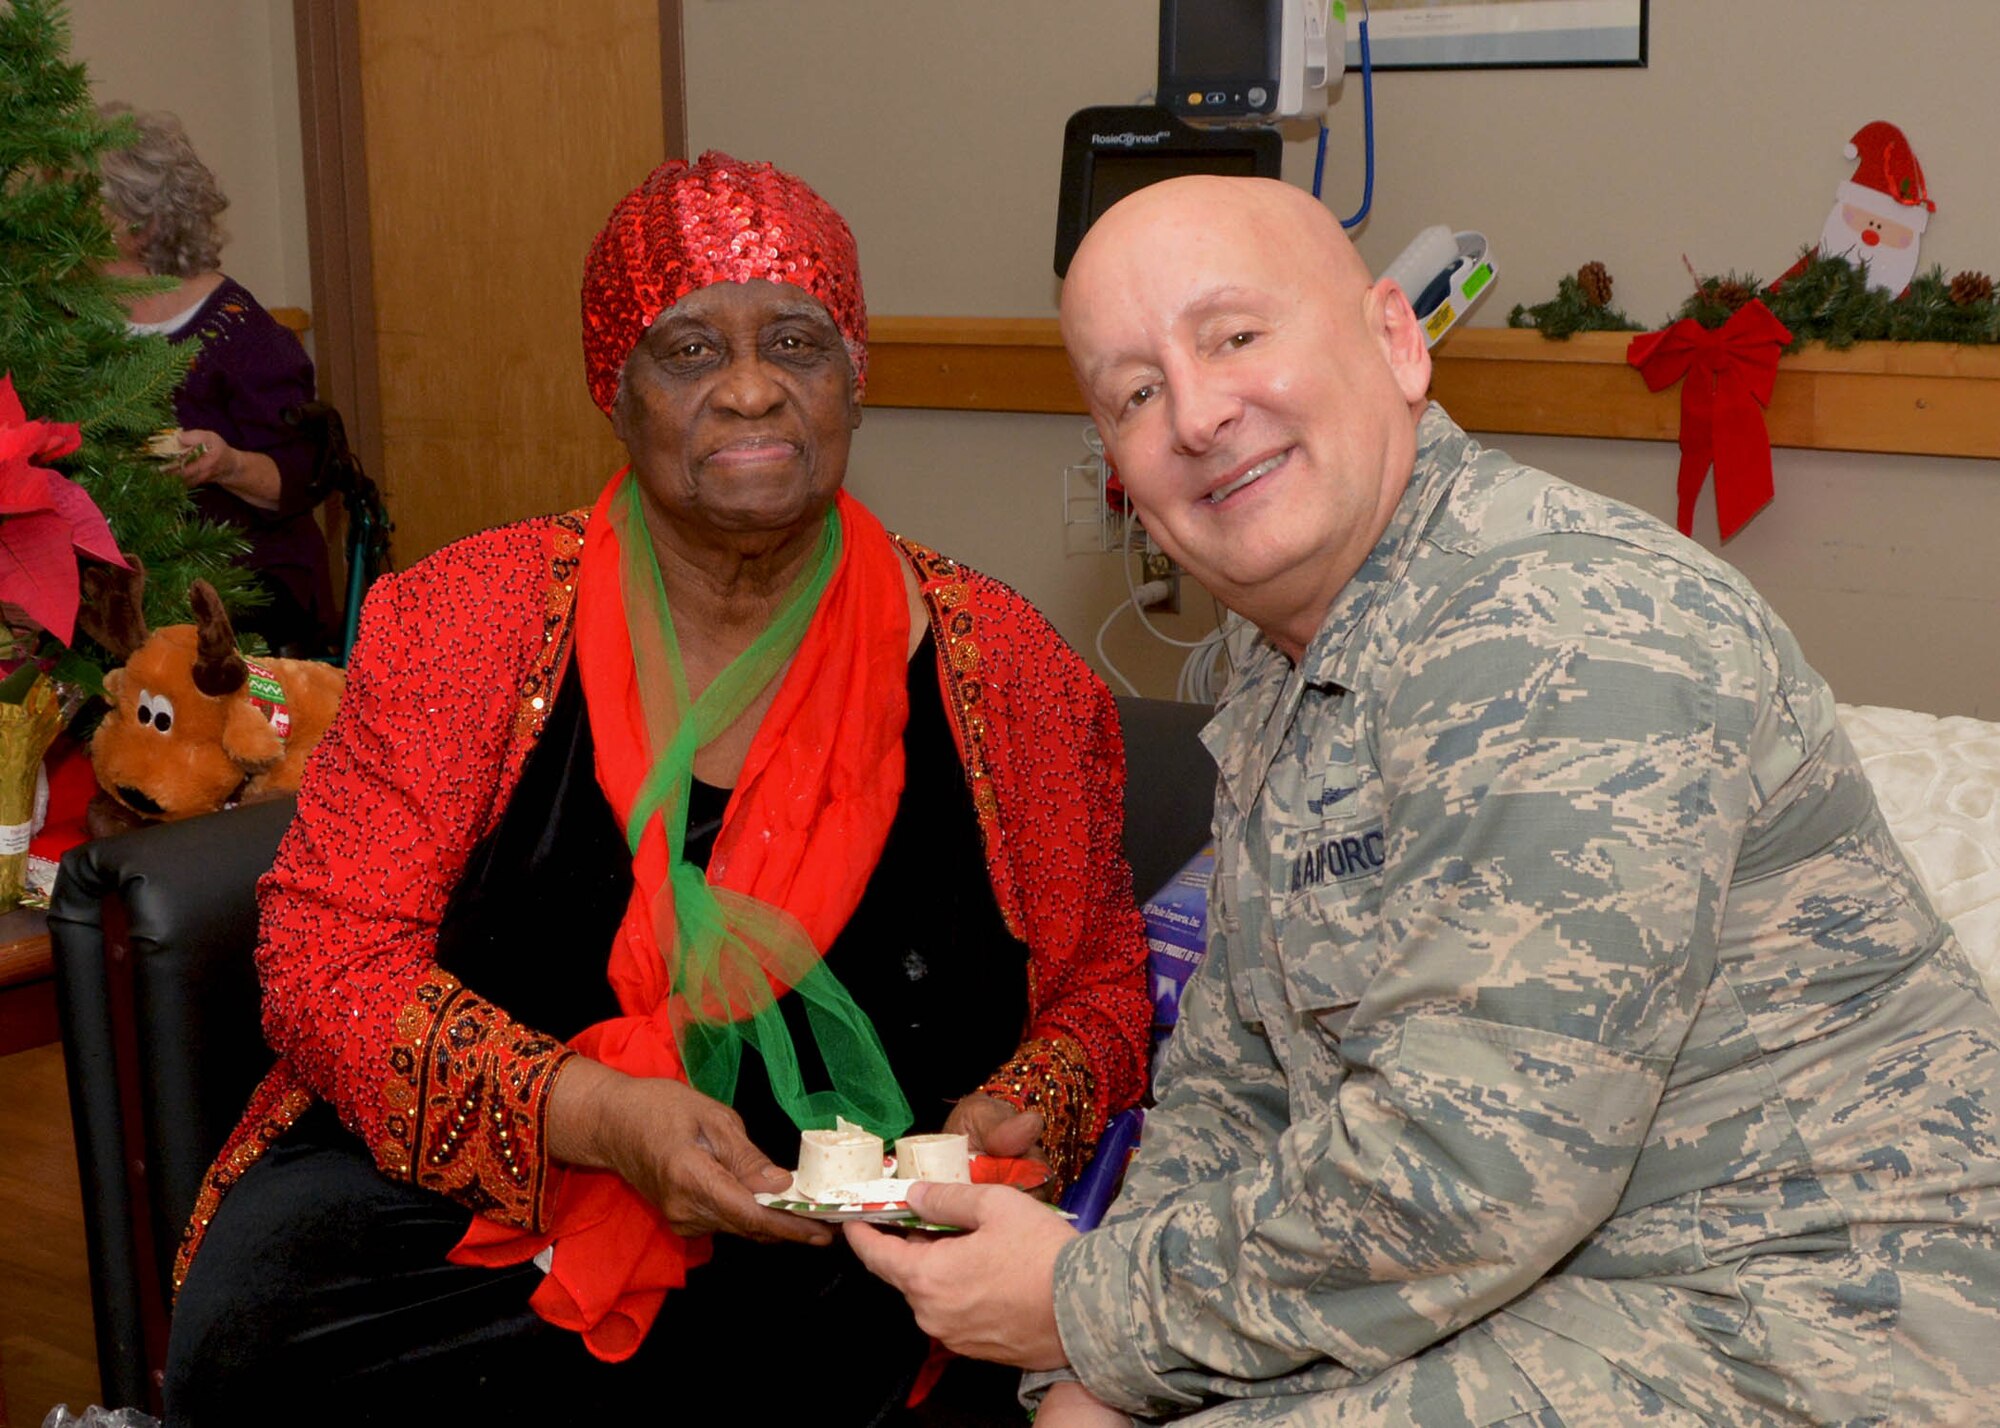 507th Mission Support Group Commander, Col. Richard Ropac, visits with a veteran Dec. 20, 2018, at the Norman Veterans Center in Norman, Oklahoma. 507th Air Refueling Wing Airmen delivered gifts and served snacks to the veterans for the holidays. (U.S. Air Force photo by Tech. Sgt. Samantha Mathison)